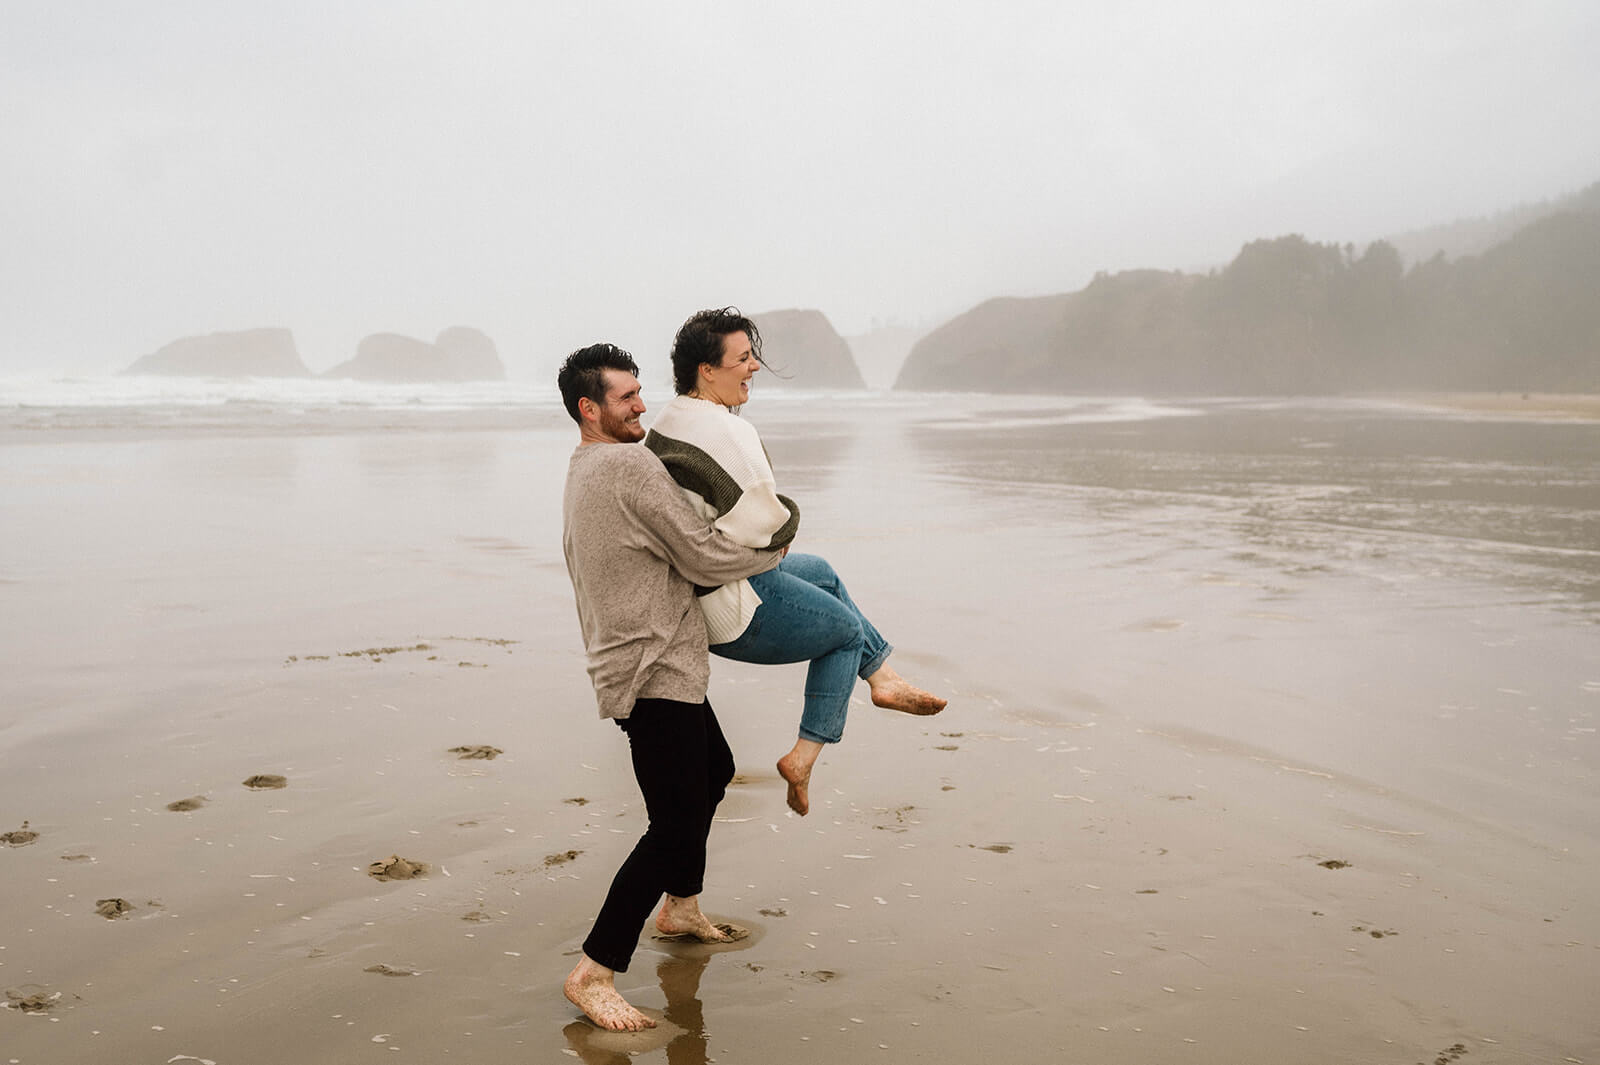 A man lifts a woman out of the sand and twirls her on Cannon Beach.